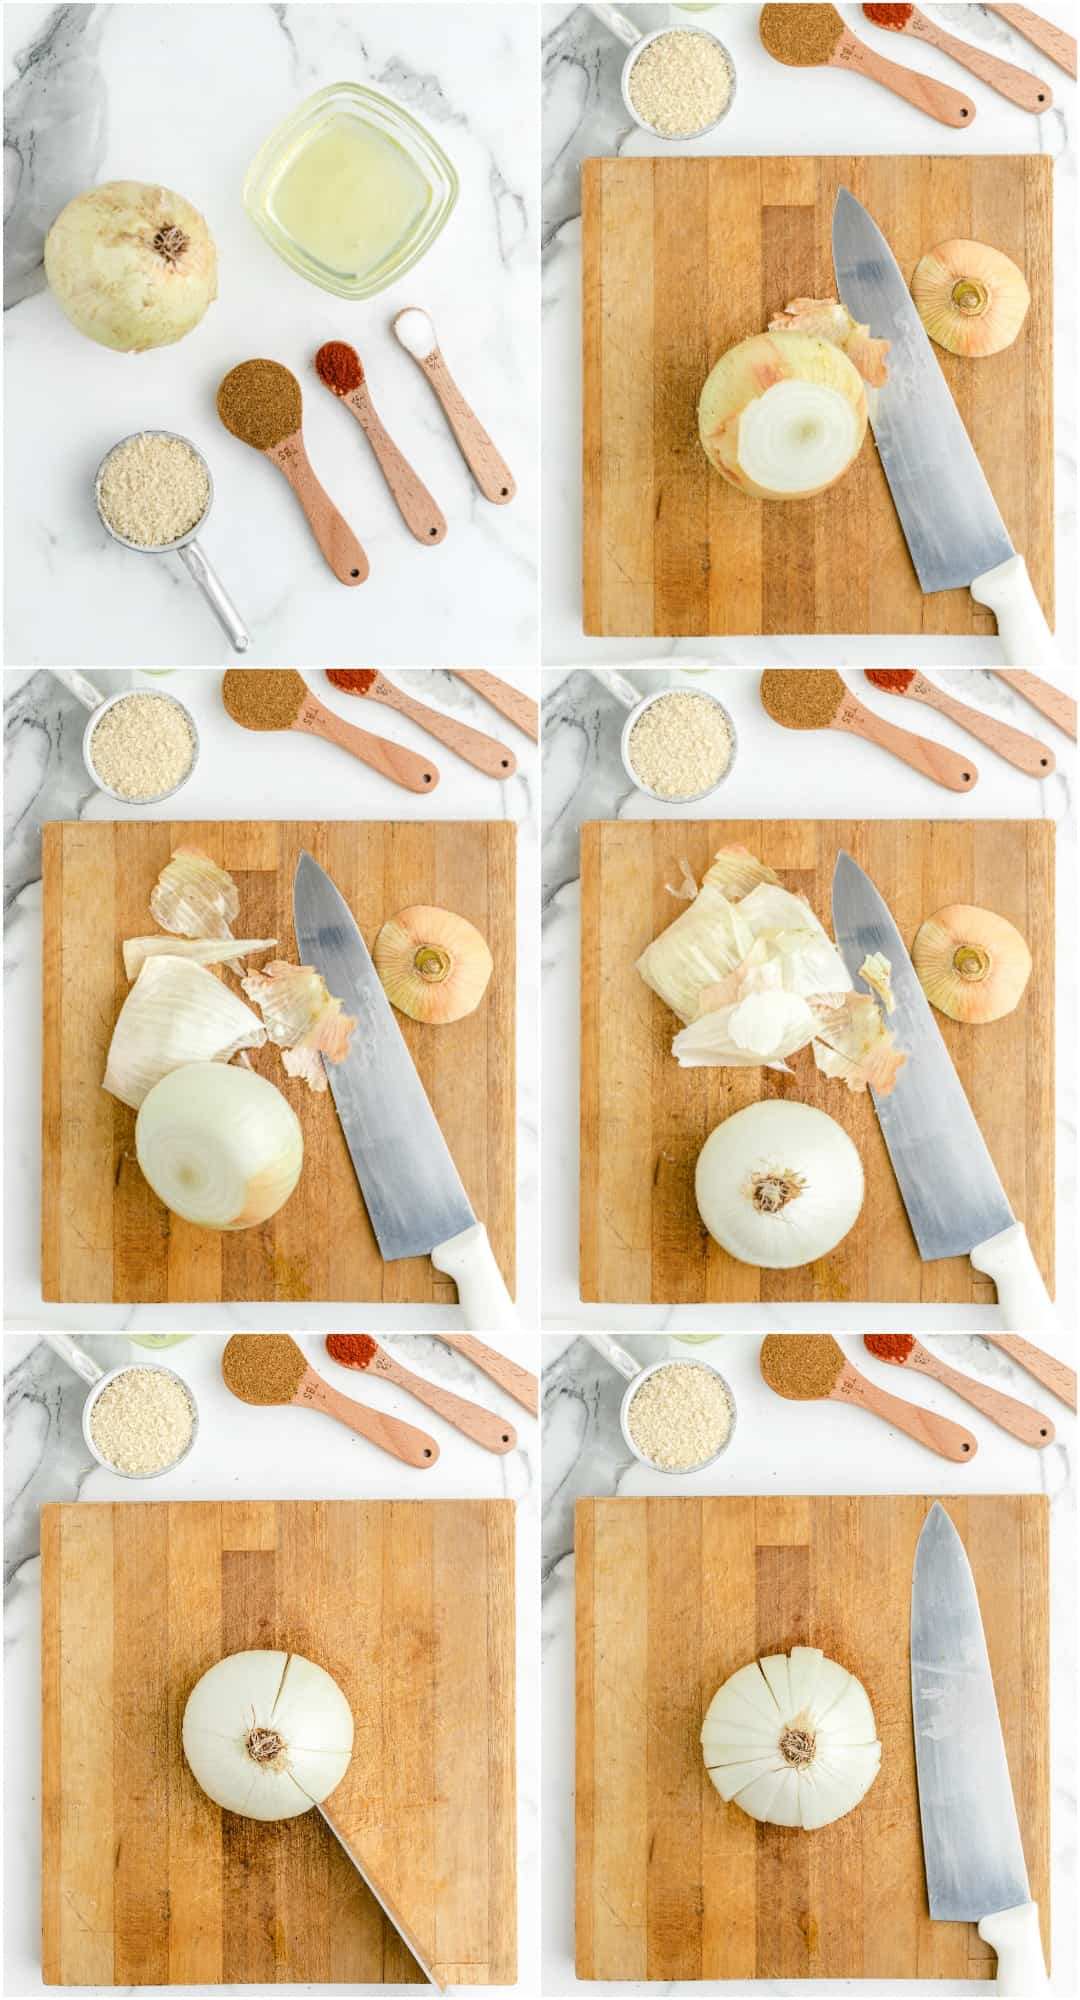 how to make blooming onion step by step photos